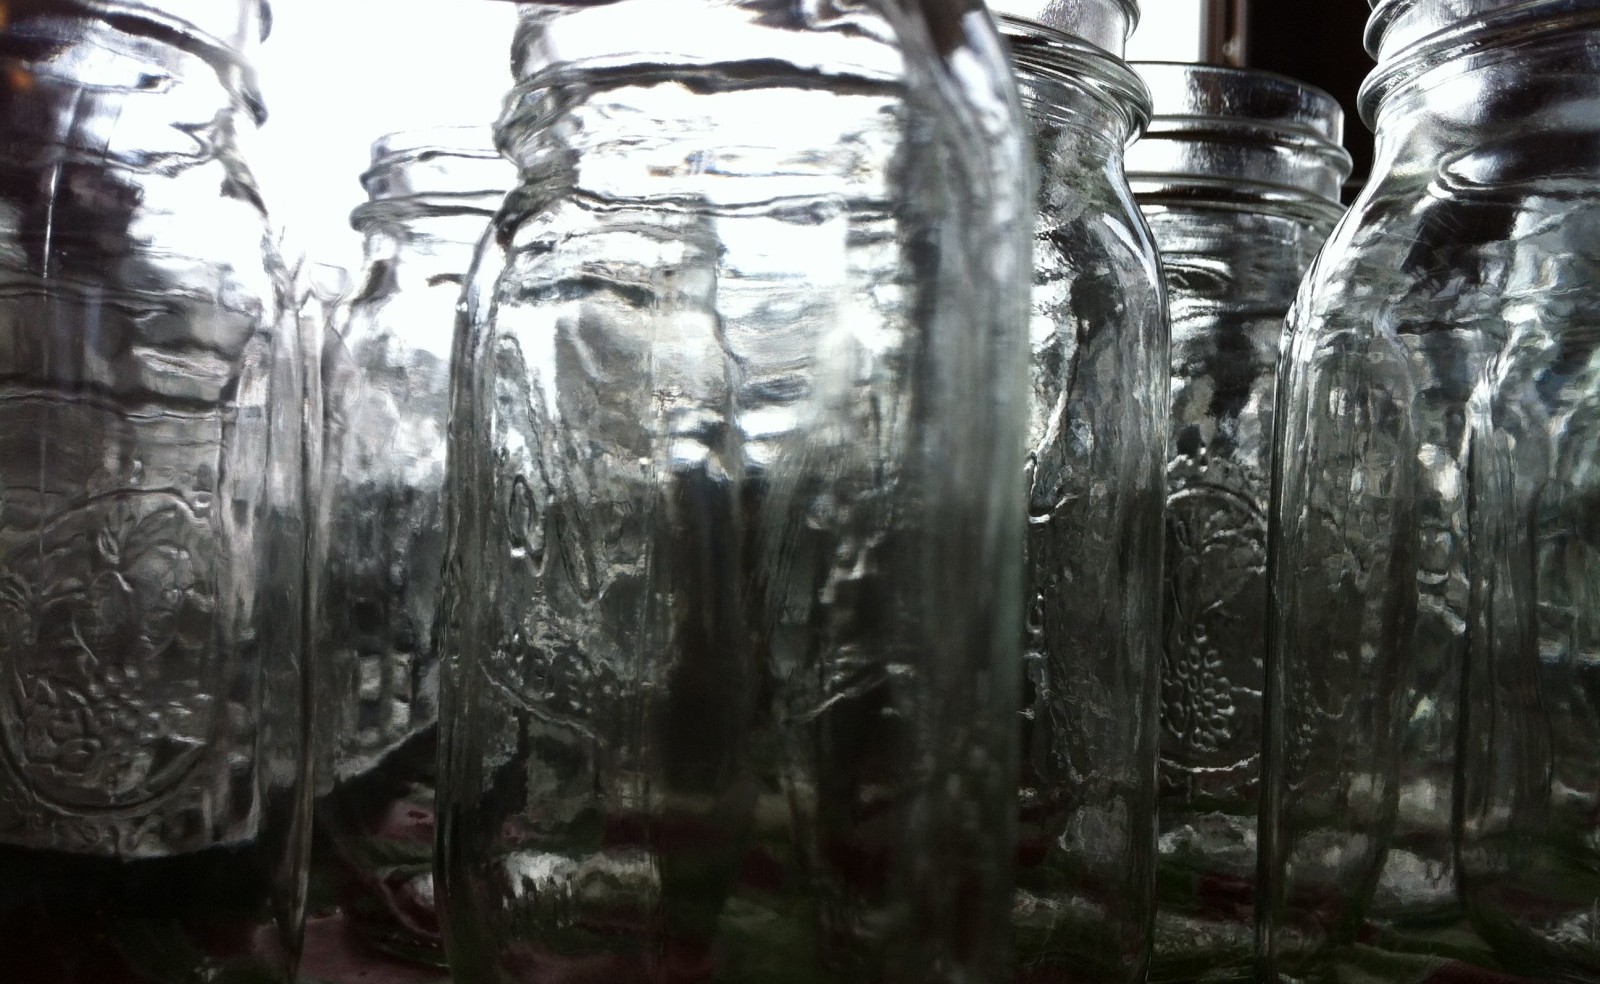 18 Ways You Can Use A Mason Jar to Eliminate Unnecessary Waste In Your Life